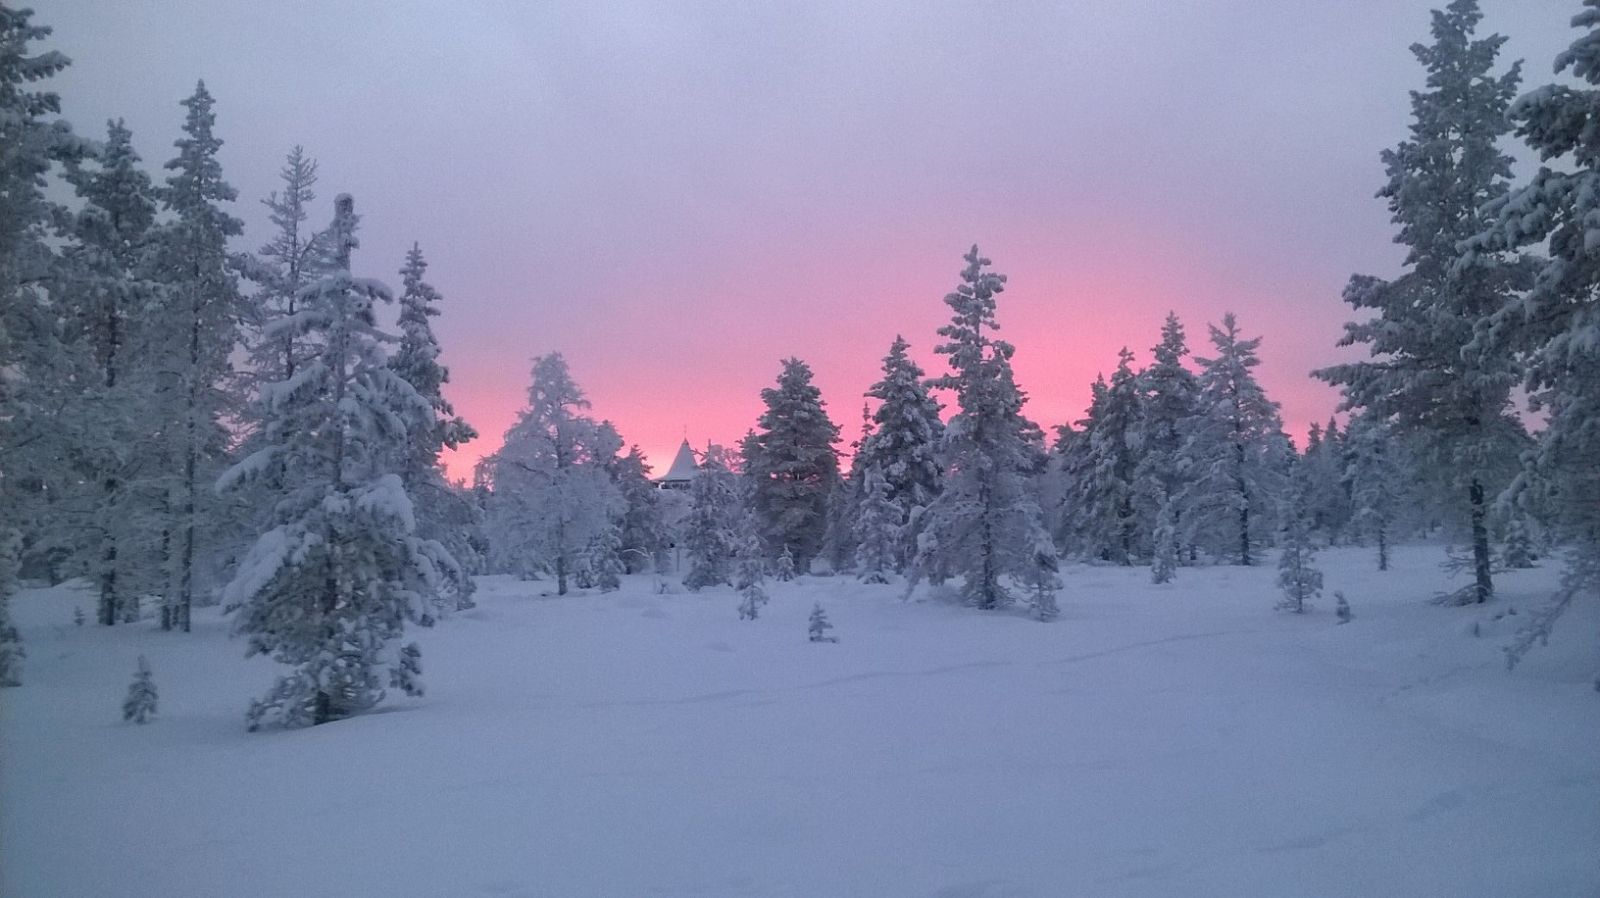 Christmas in Finland